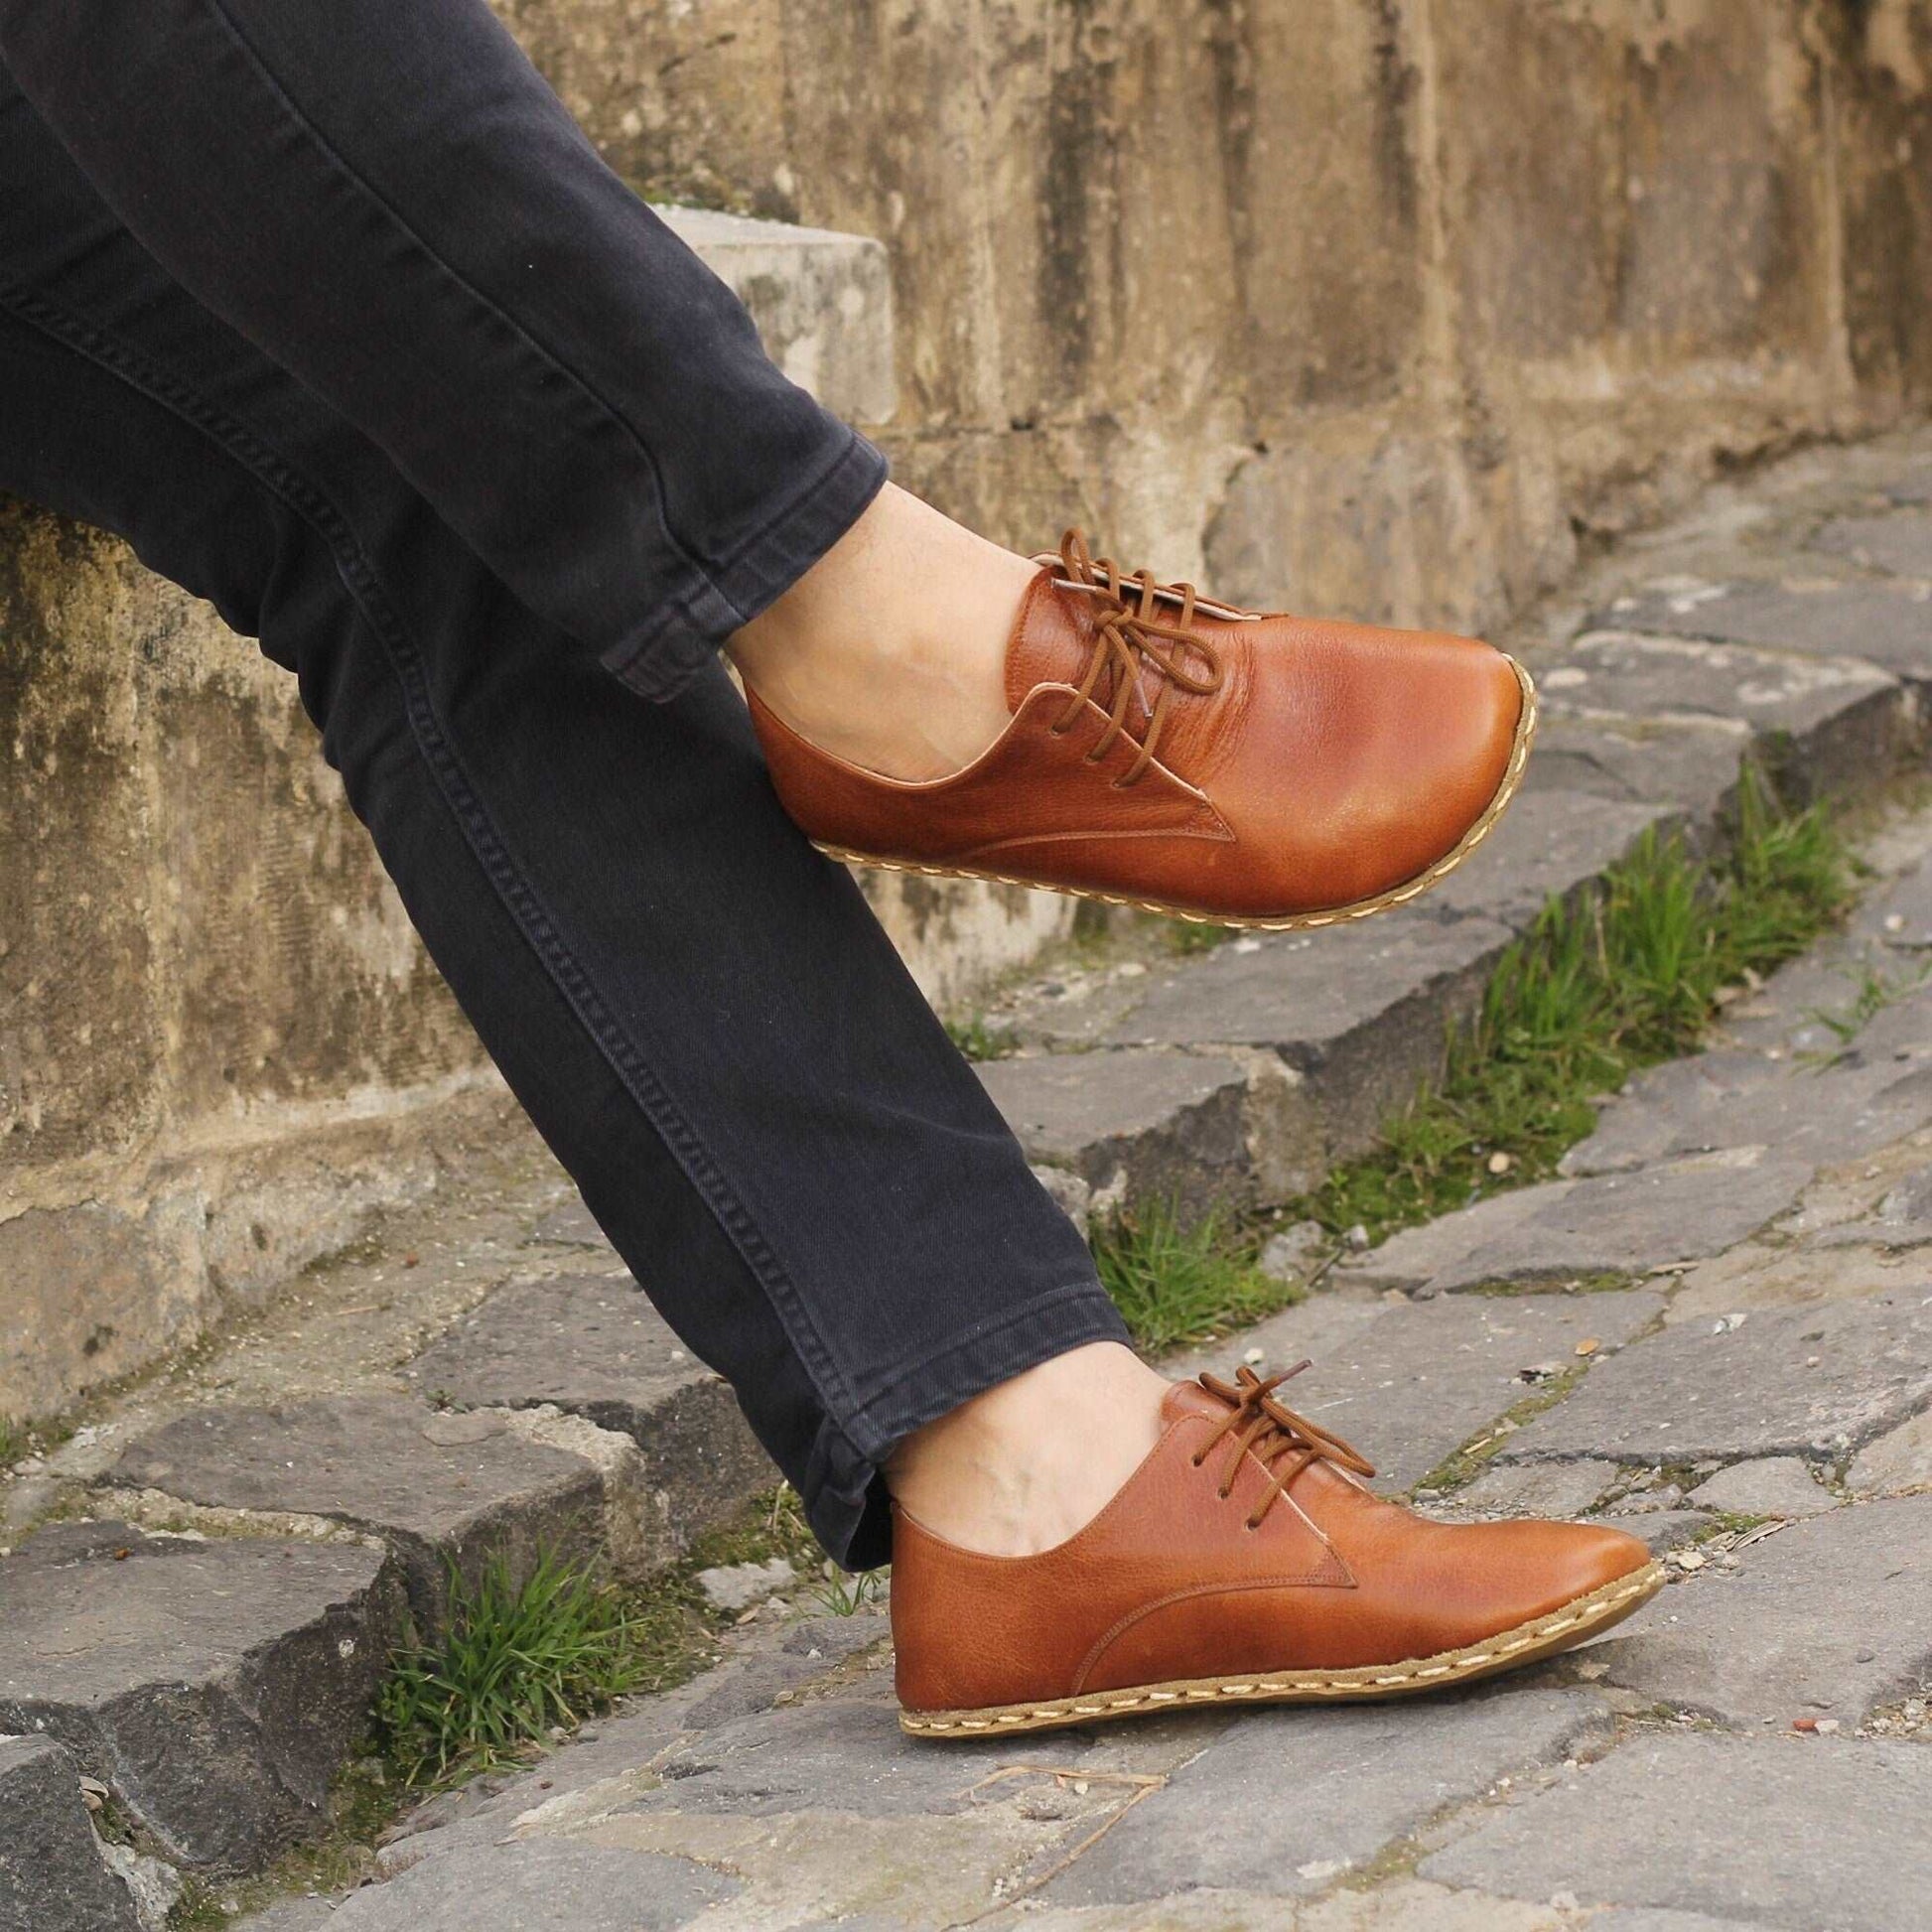 Men's handmade lace-up shoes in brown calf leather